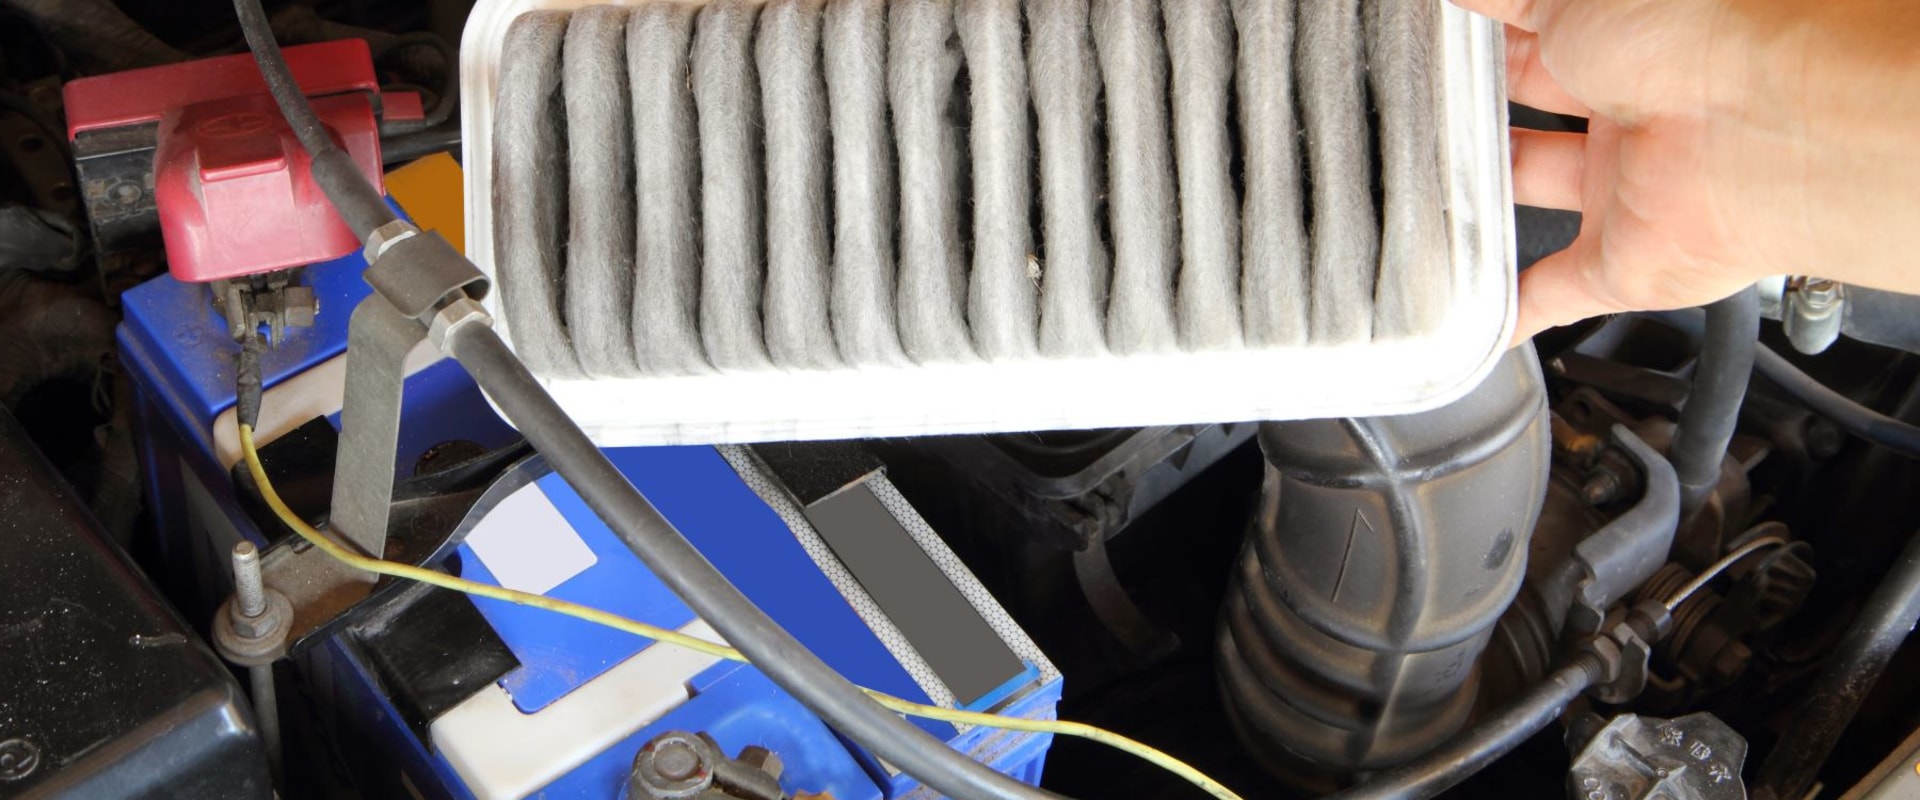 What Happens to Your Car Engine if You Use the Wrong Air Filter?